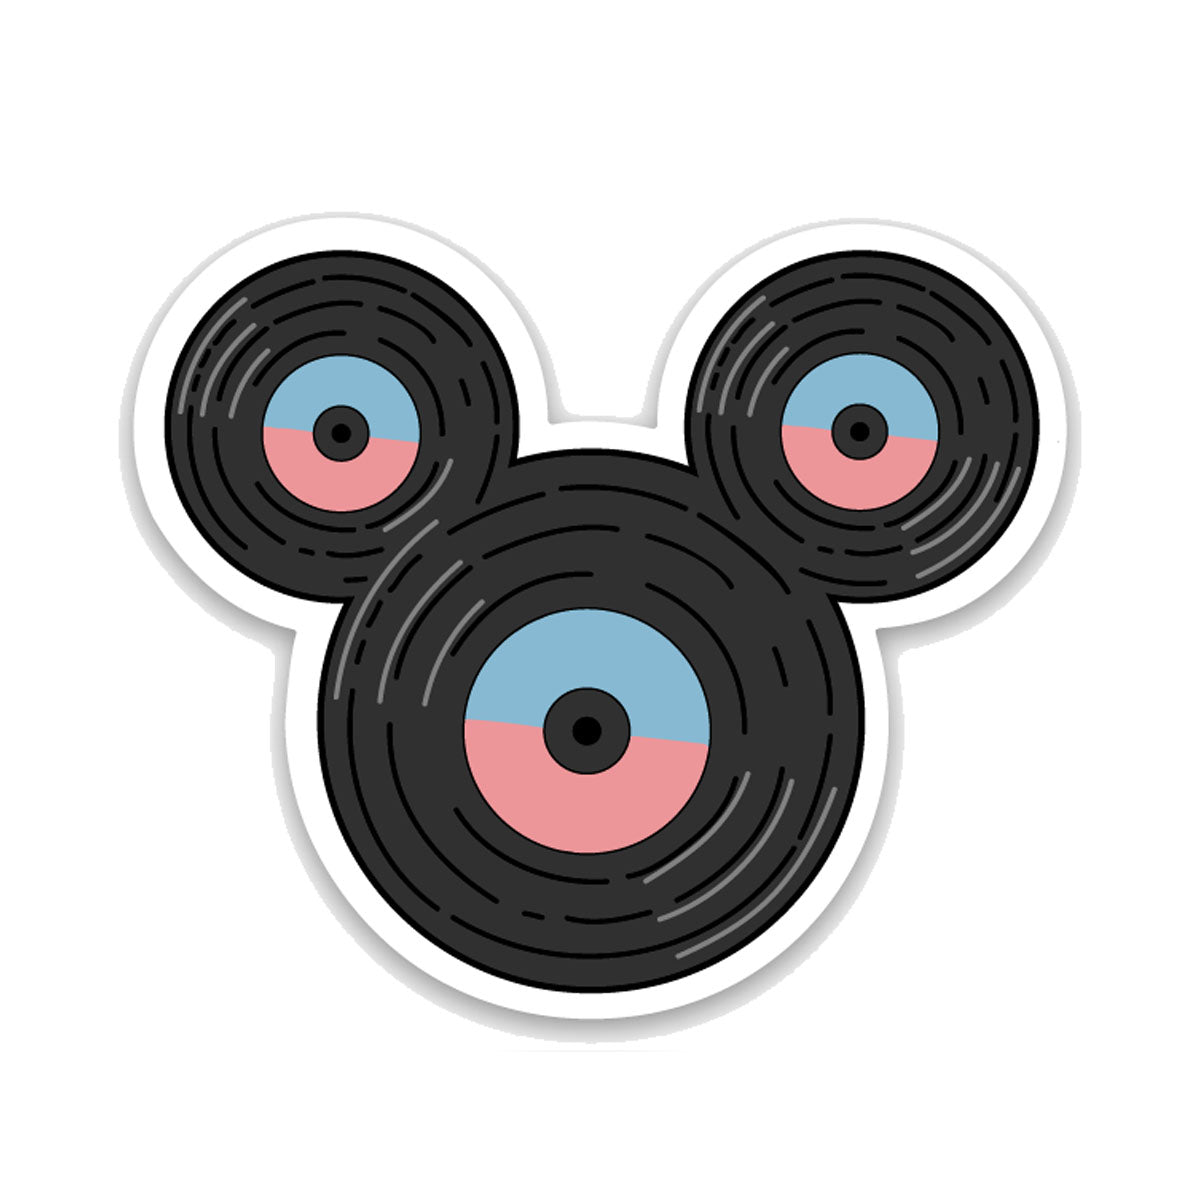 Vinyl "Mouse" Record Decal